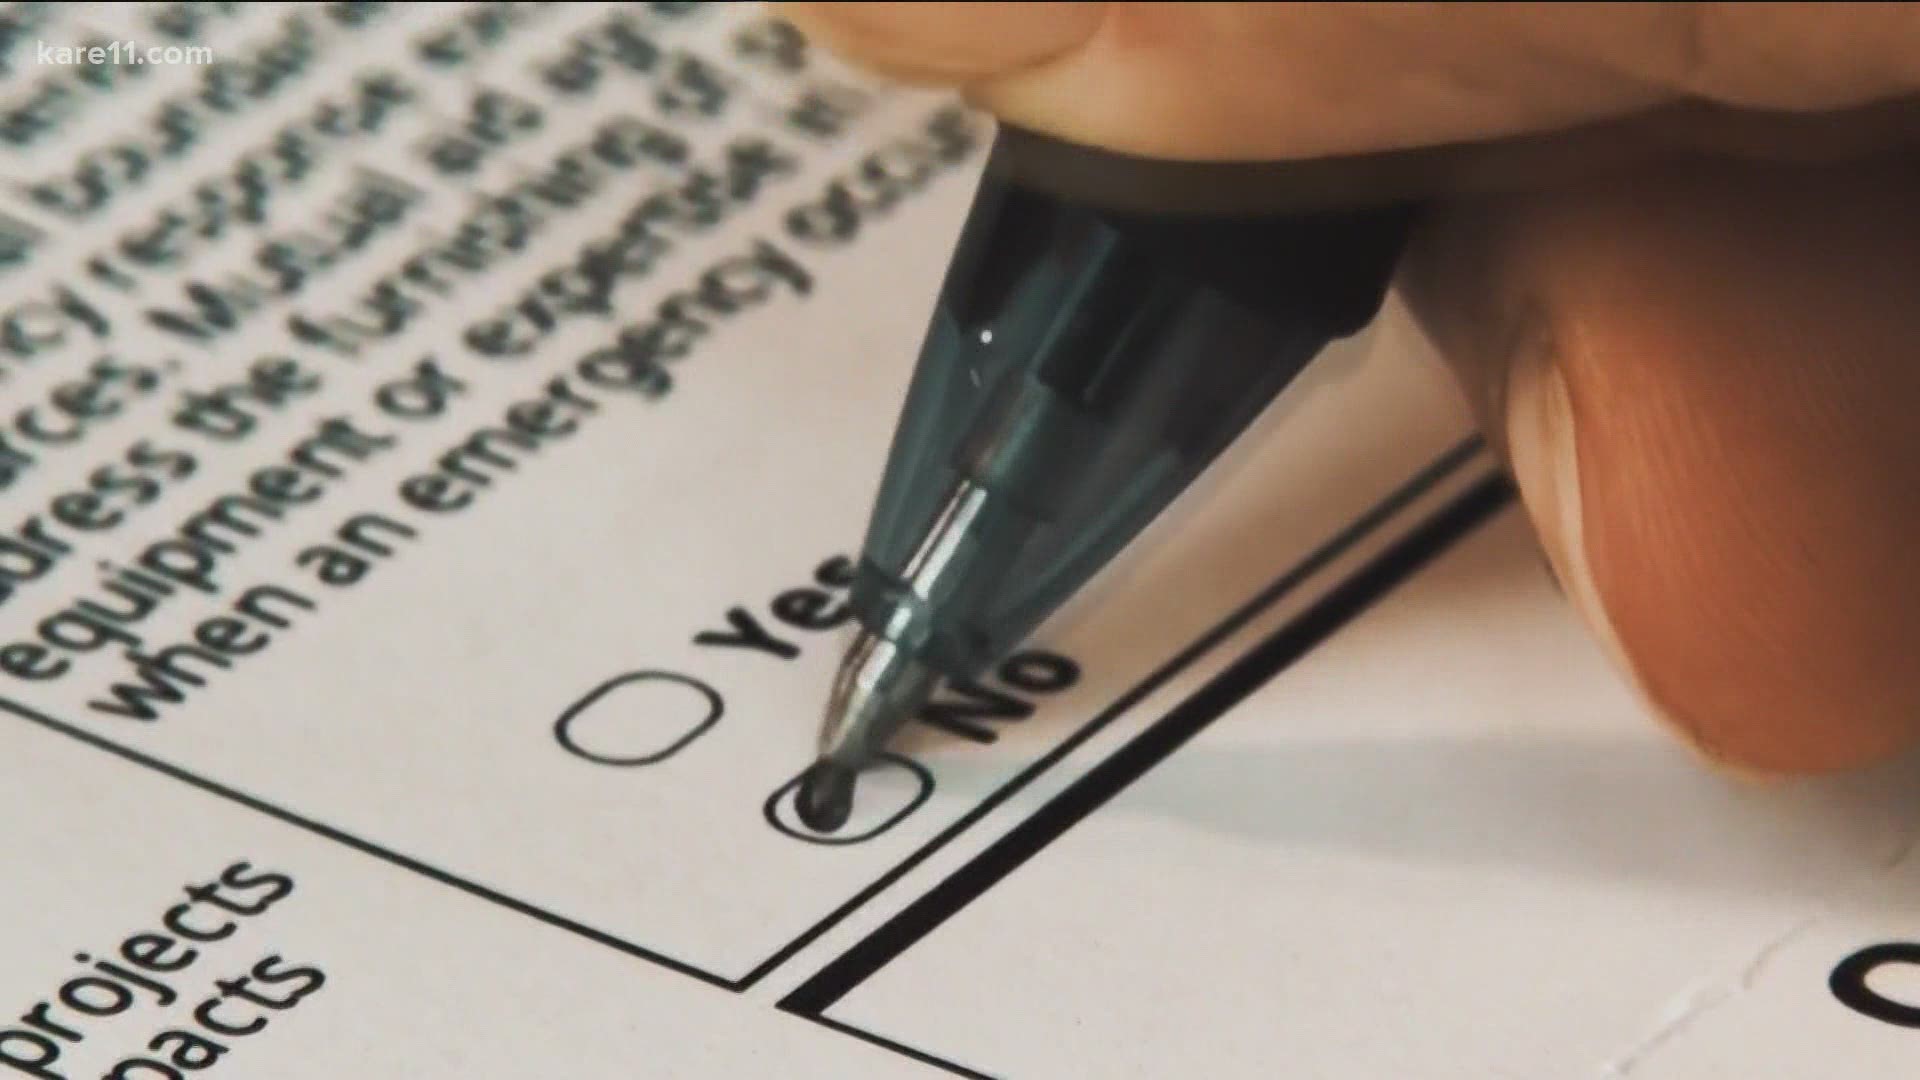 A decision by the 8th Circuit Court of Appeals is pushing up the deadline for MN voters to turn in their ballots, a development that could impact 400,000 people.